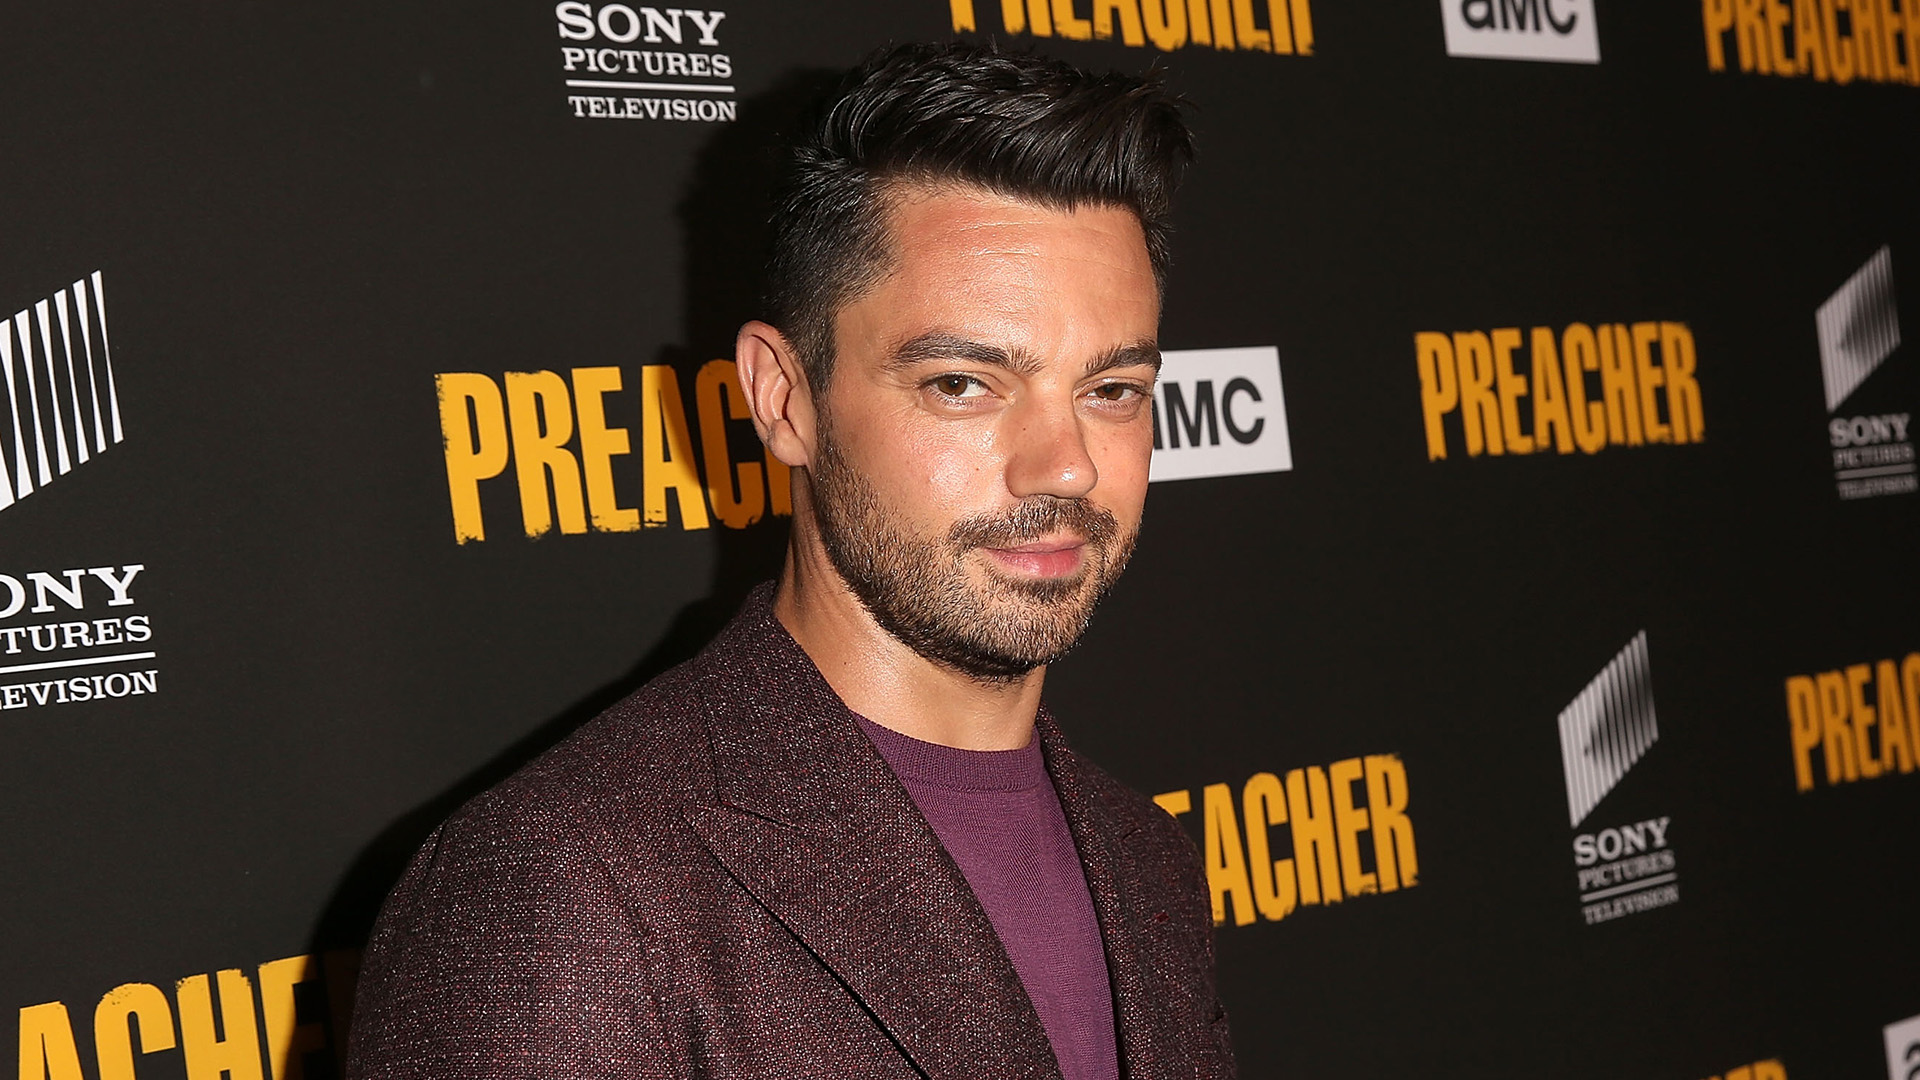 Where to Look for Dominic Cooper: From 'The History Boys' to AMC's 'Spy City'